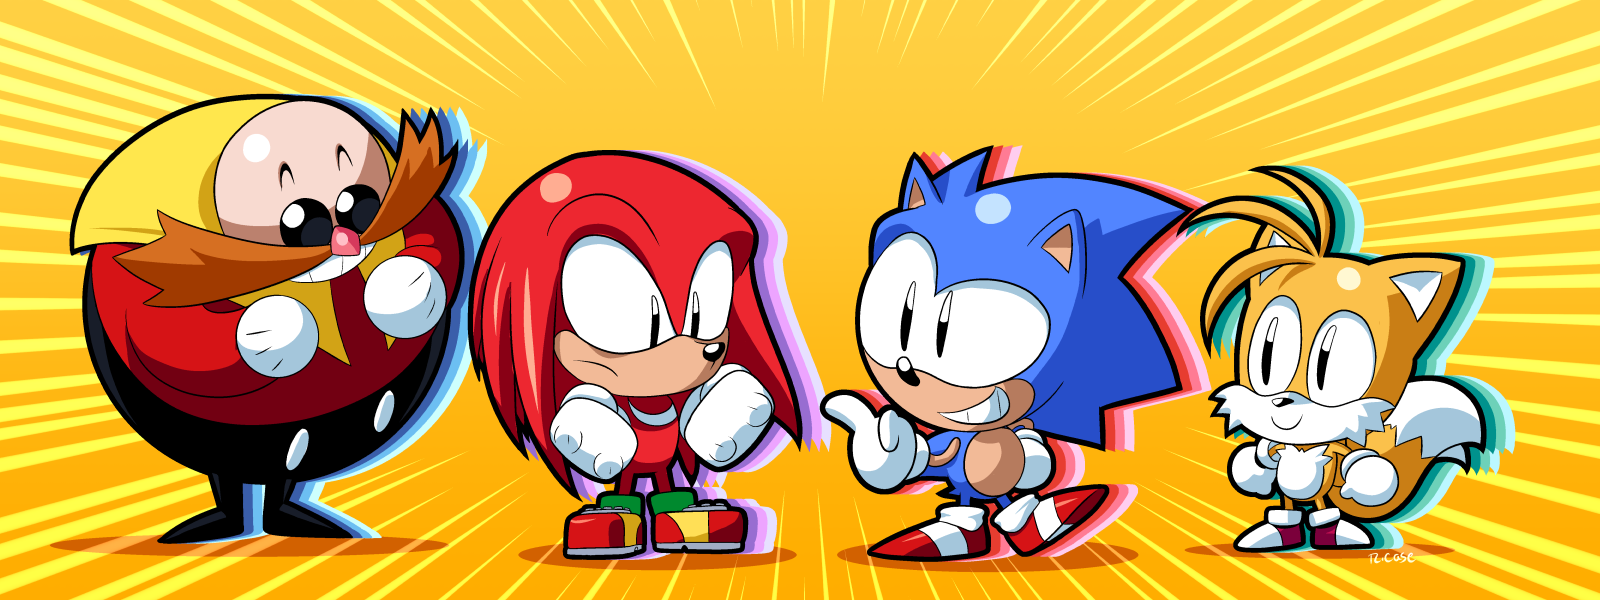 Design your own cute chibi sonic with these easy steps